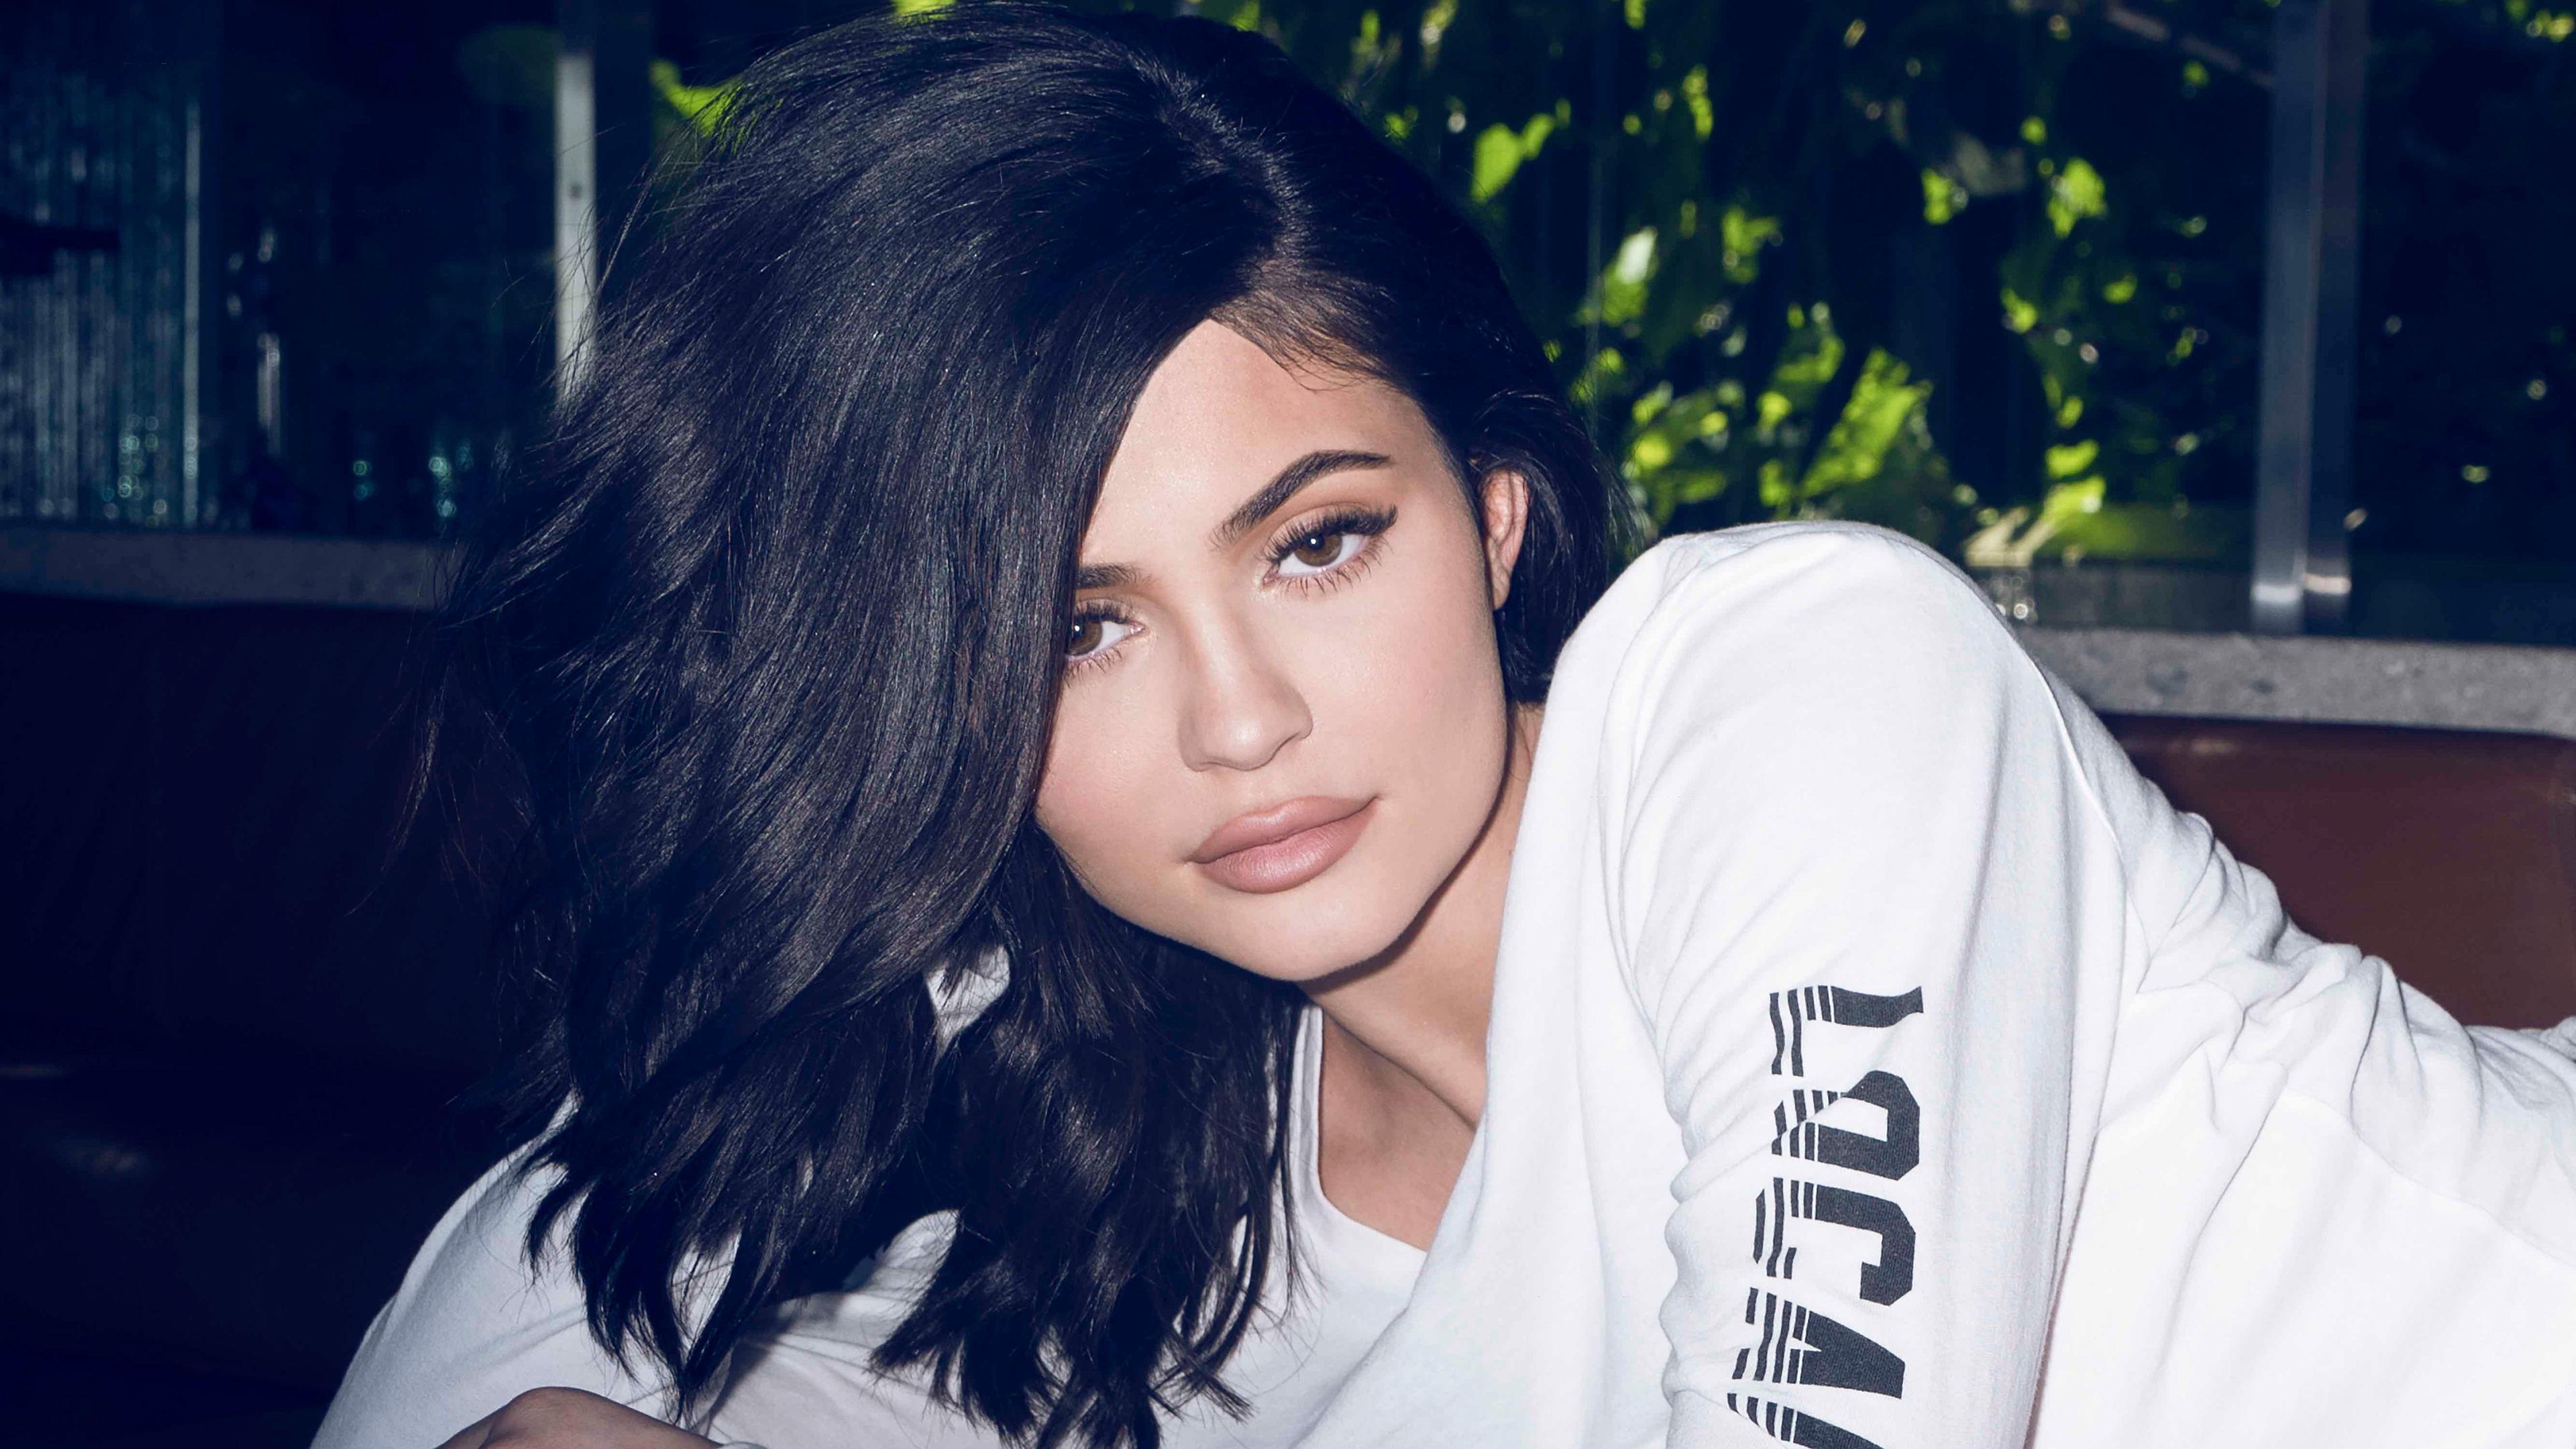 65 Kylie Jenner  Android iPhone Desktop HD Backgrounds  Wallpapers  1080p 4k